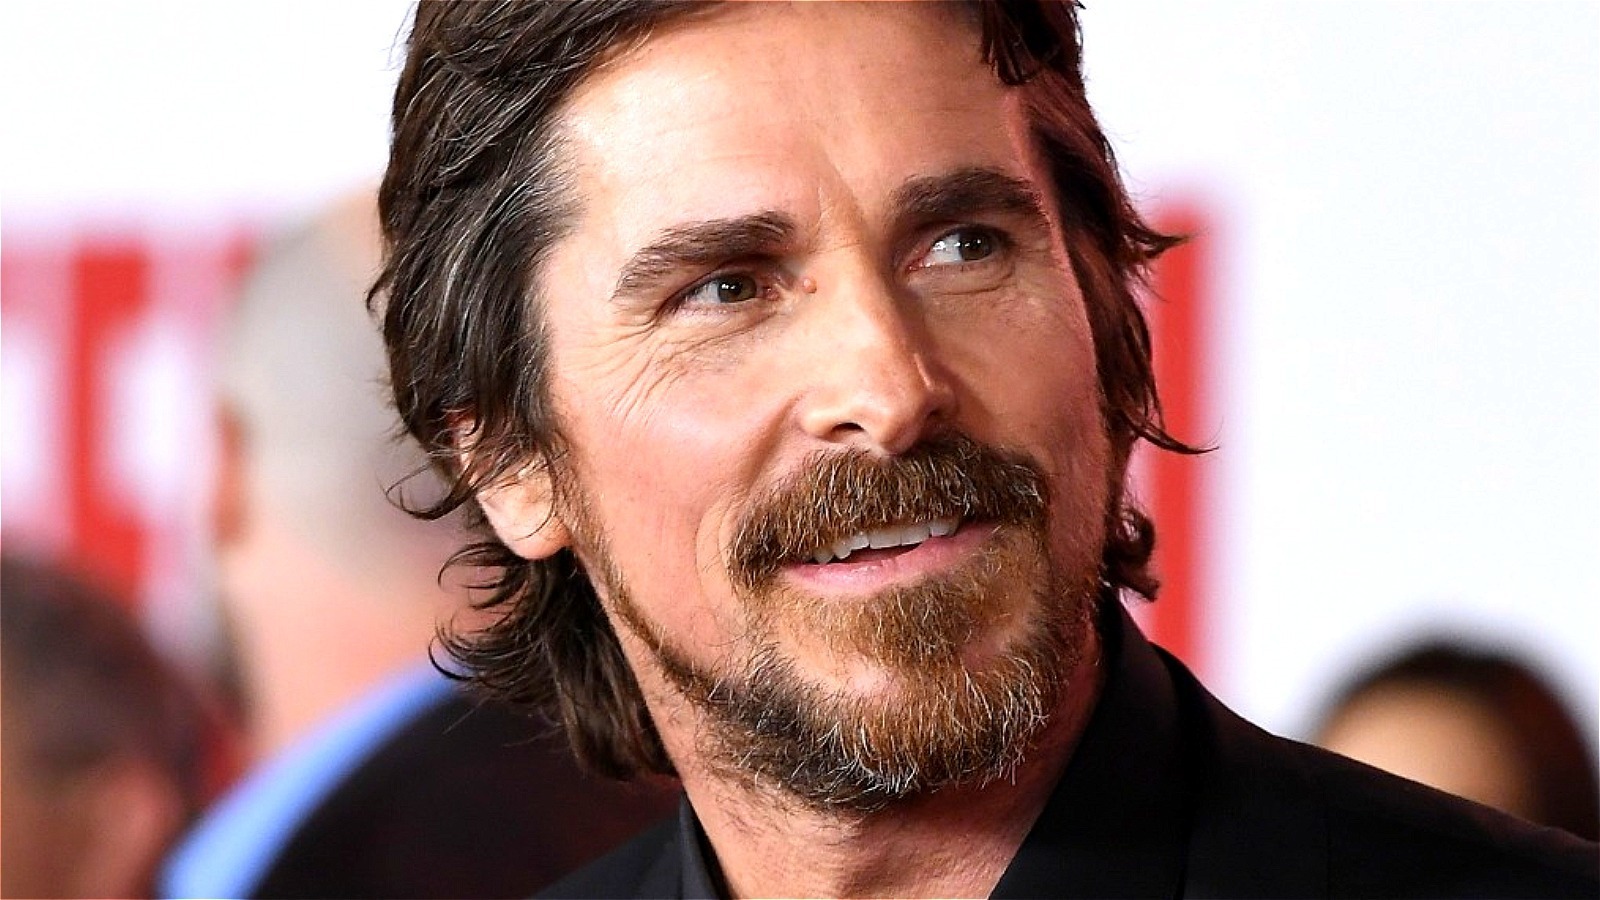 Christian Bale would return as Batman under one condition: ‘I’d be in’